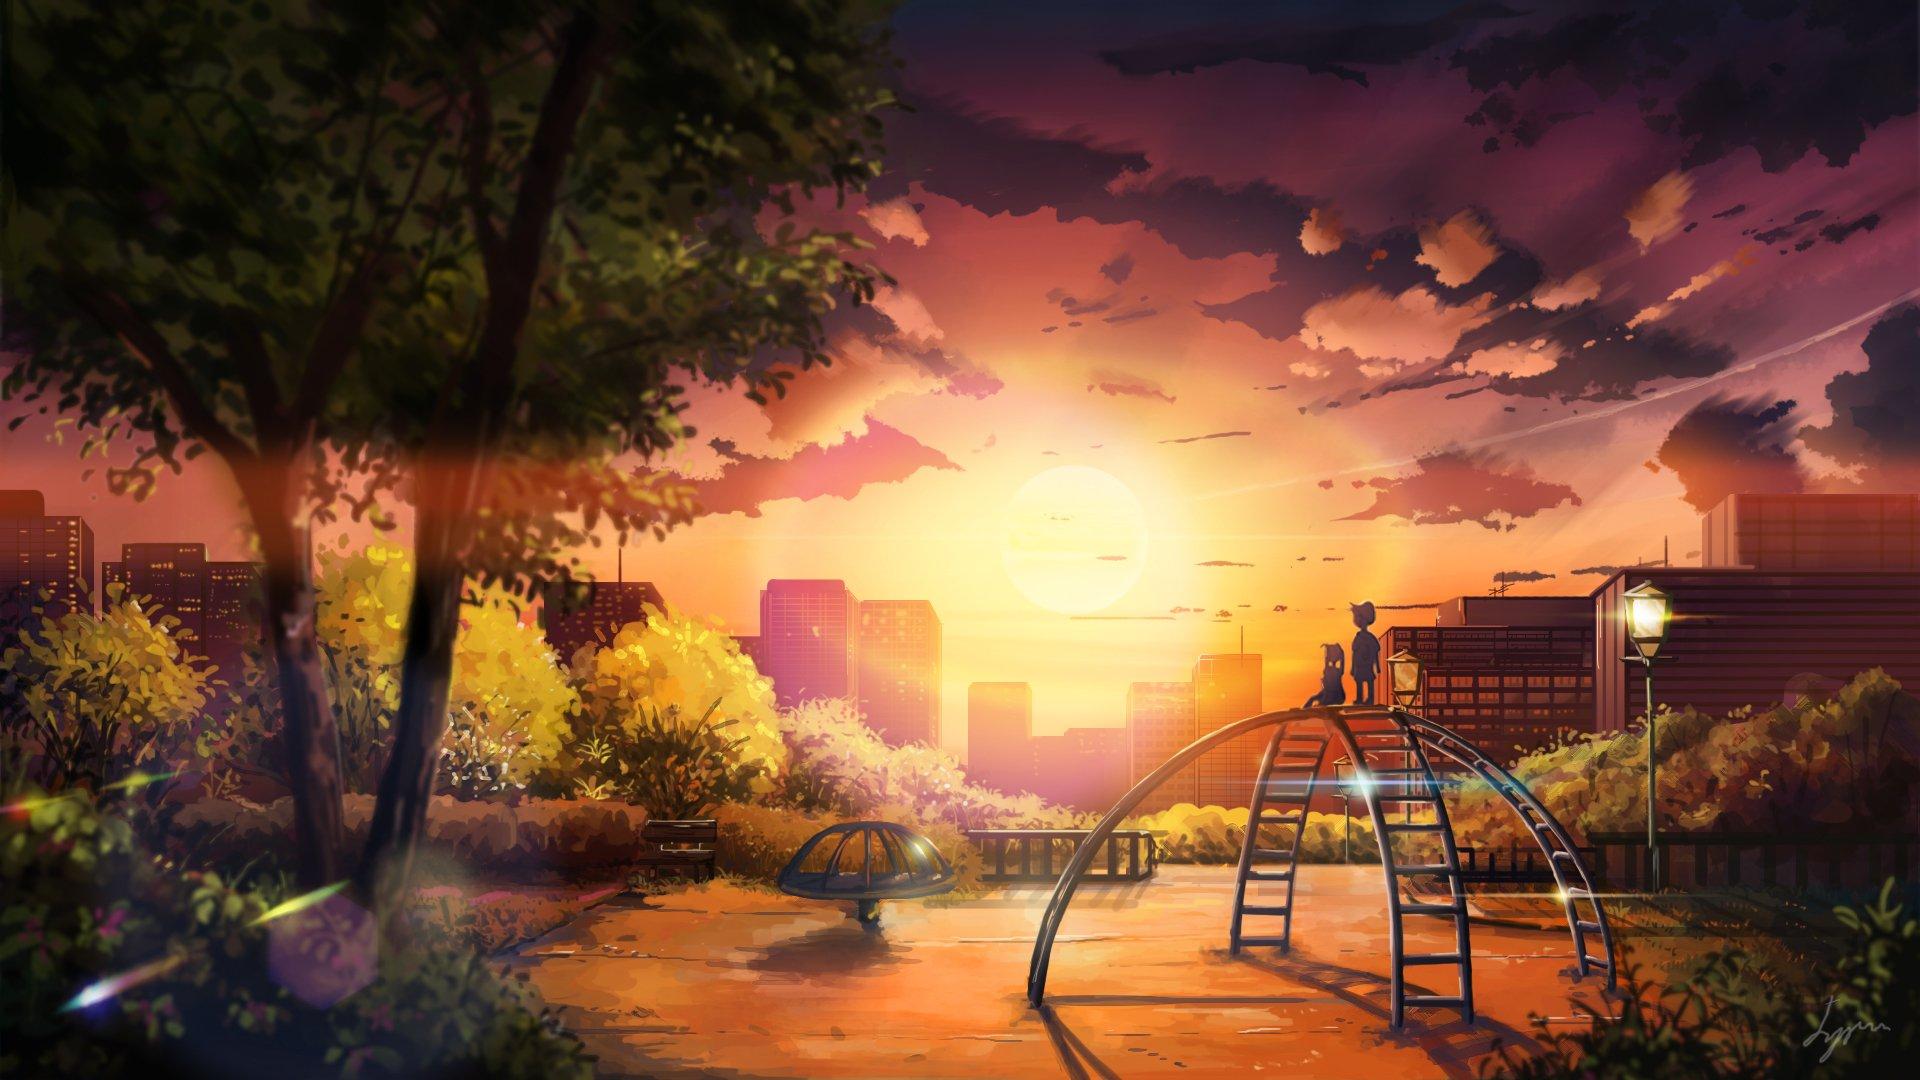 4k Scenery Sunset Anime Wallpapers - Wallpaper Cave